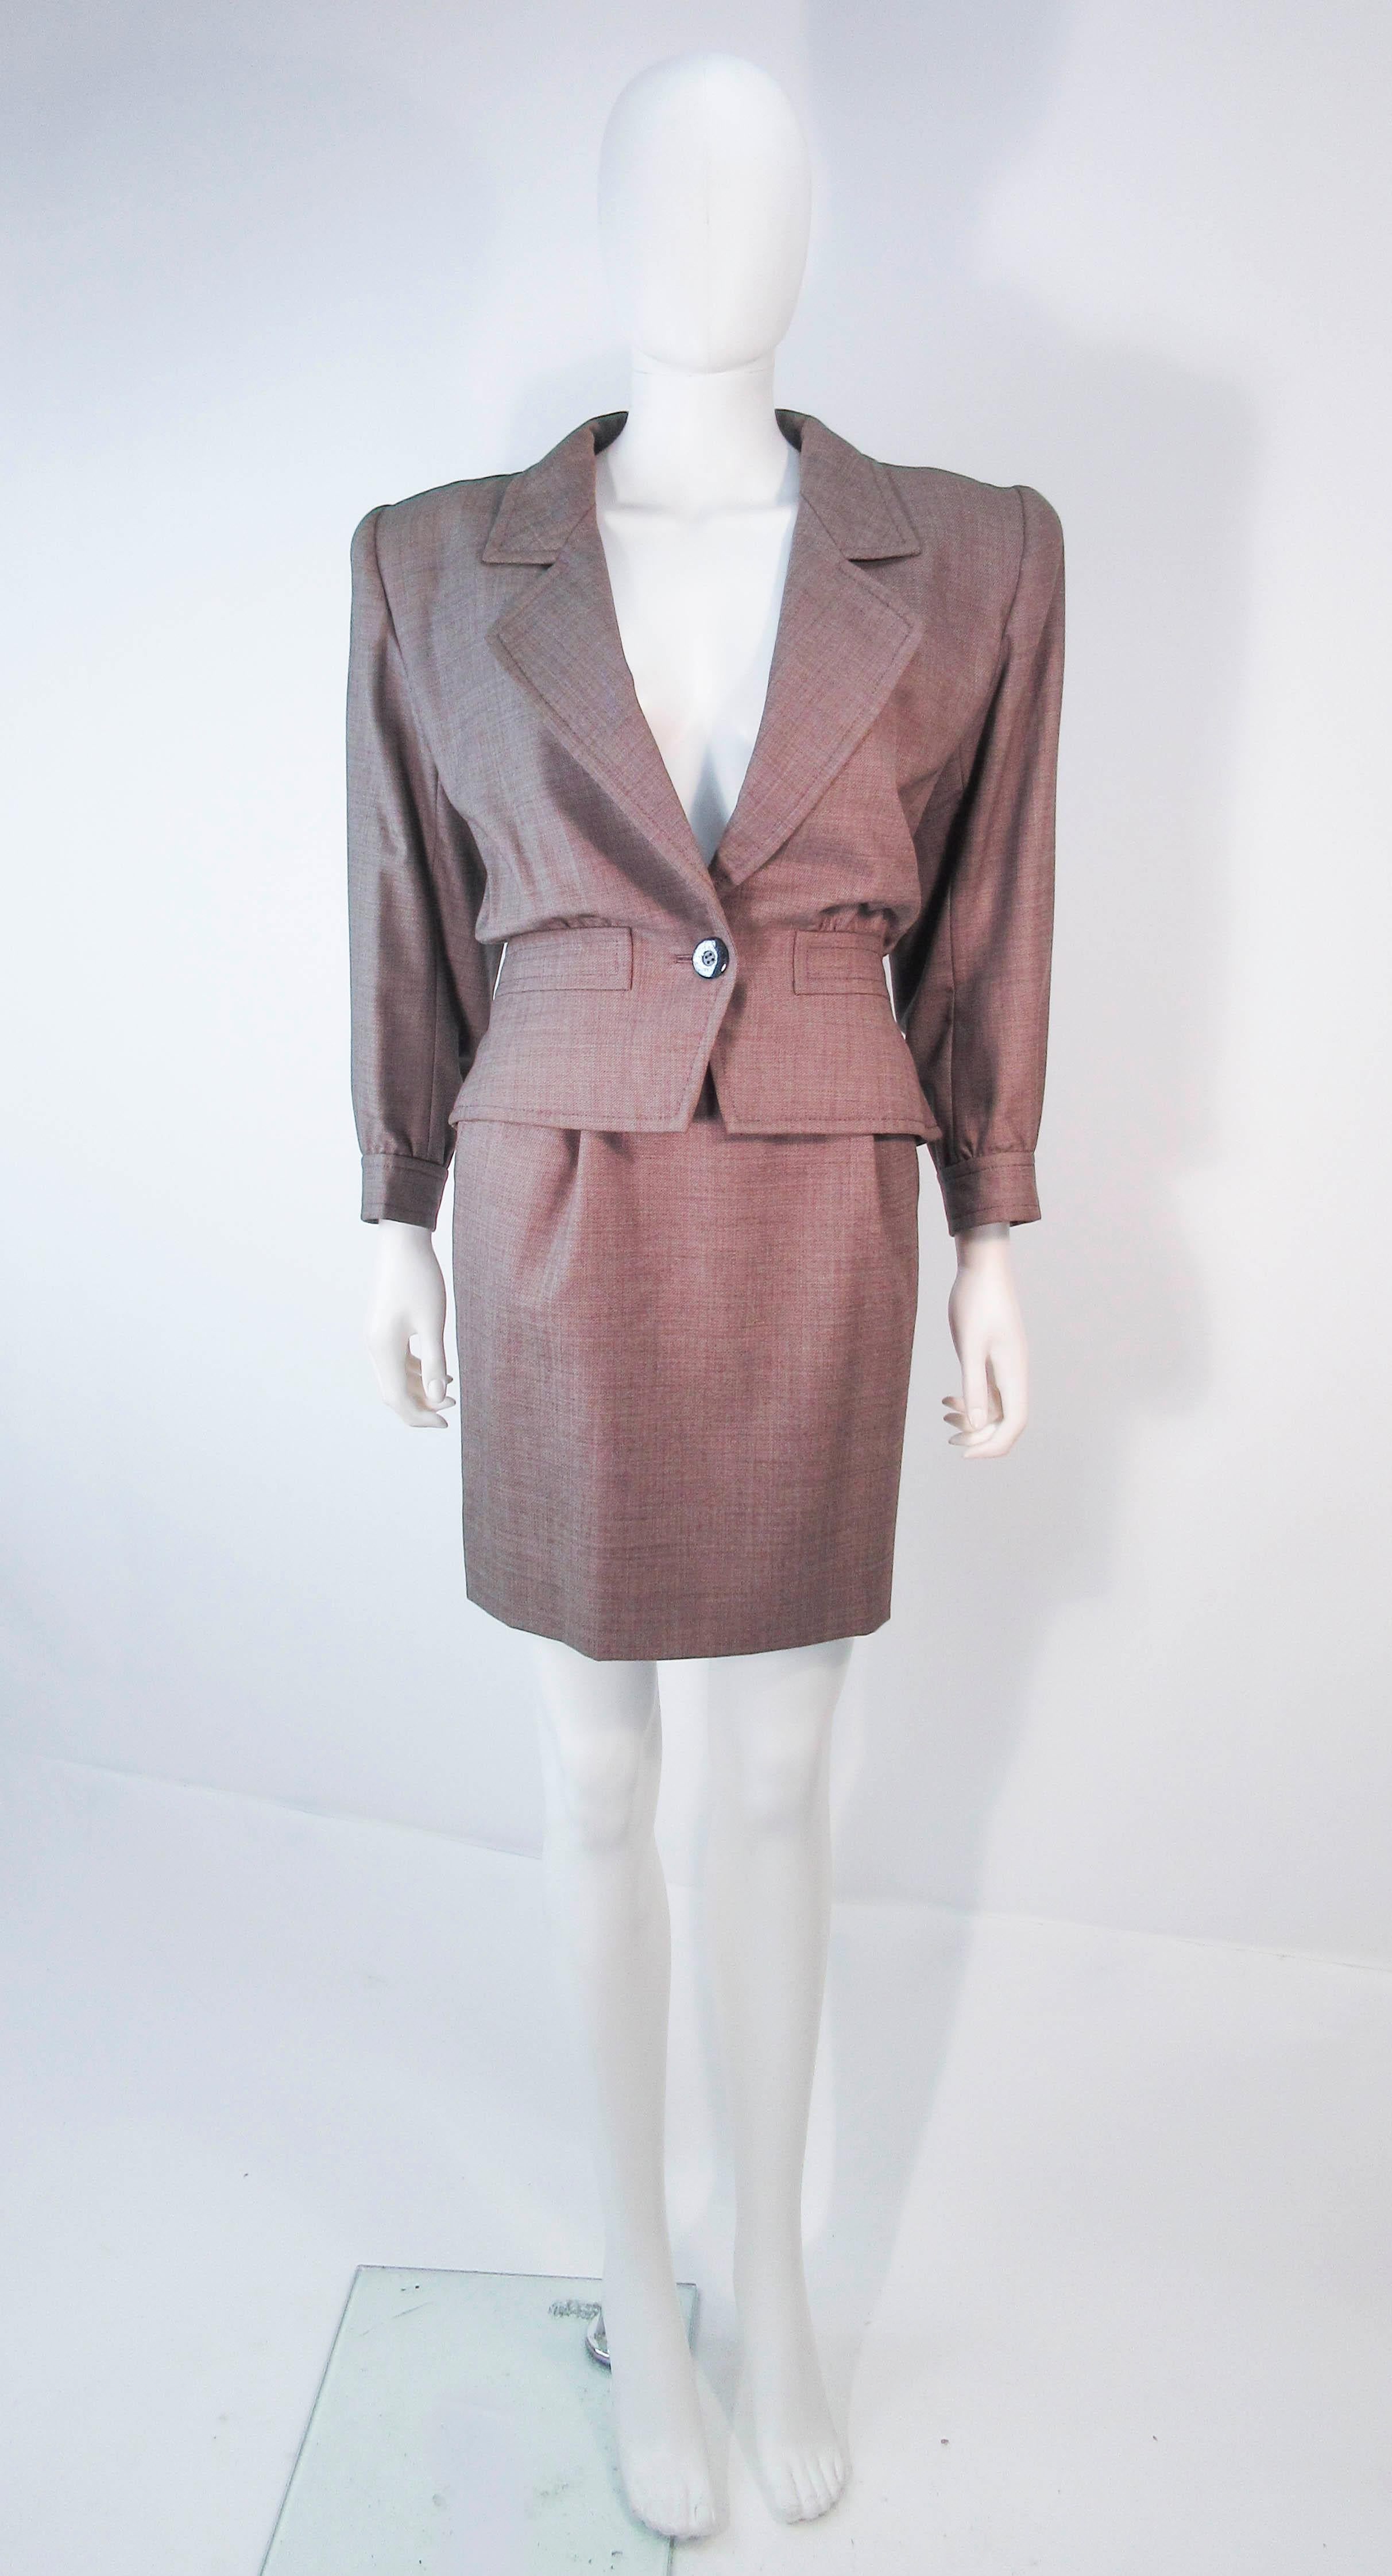 This Yves Saint Laurent suit is composed of a brown wool. Features a beautiful classic single button style blazer and a wonderful pencil skirt. In excellent vintage condition (some signs of wear due to age). Made in France.

**Please cross-reference